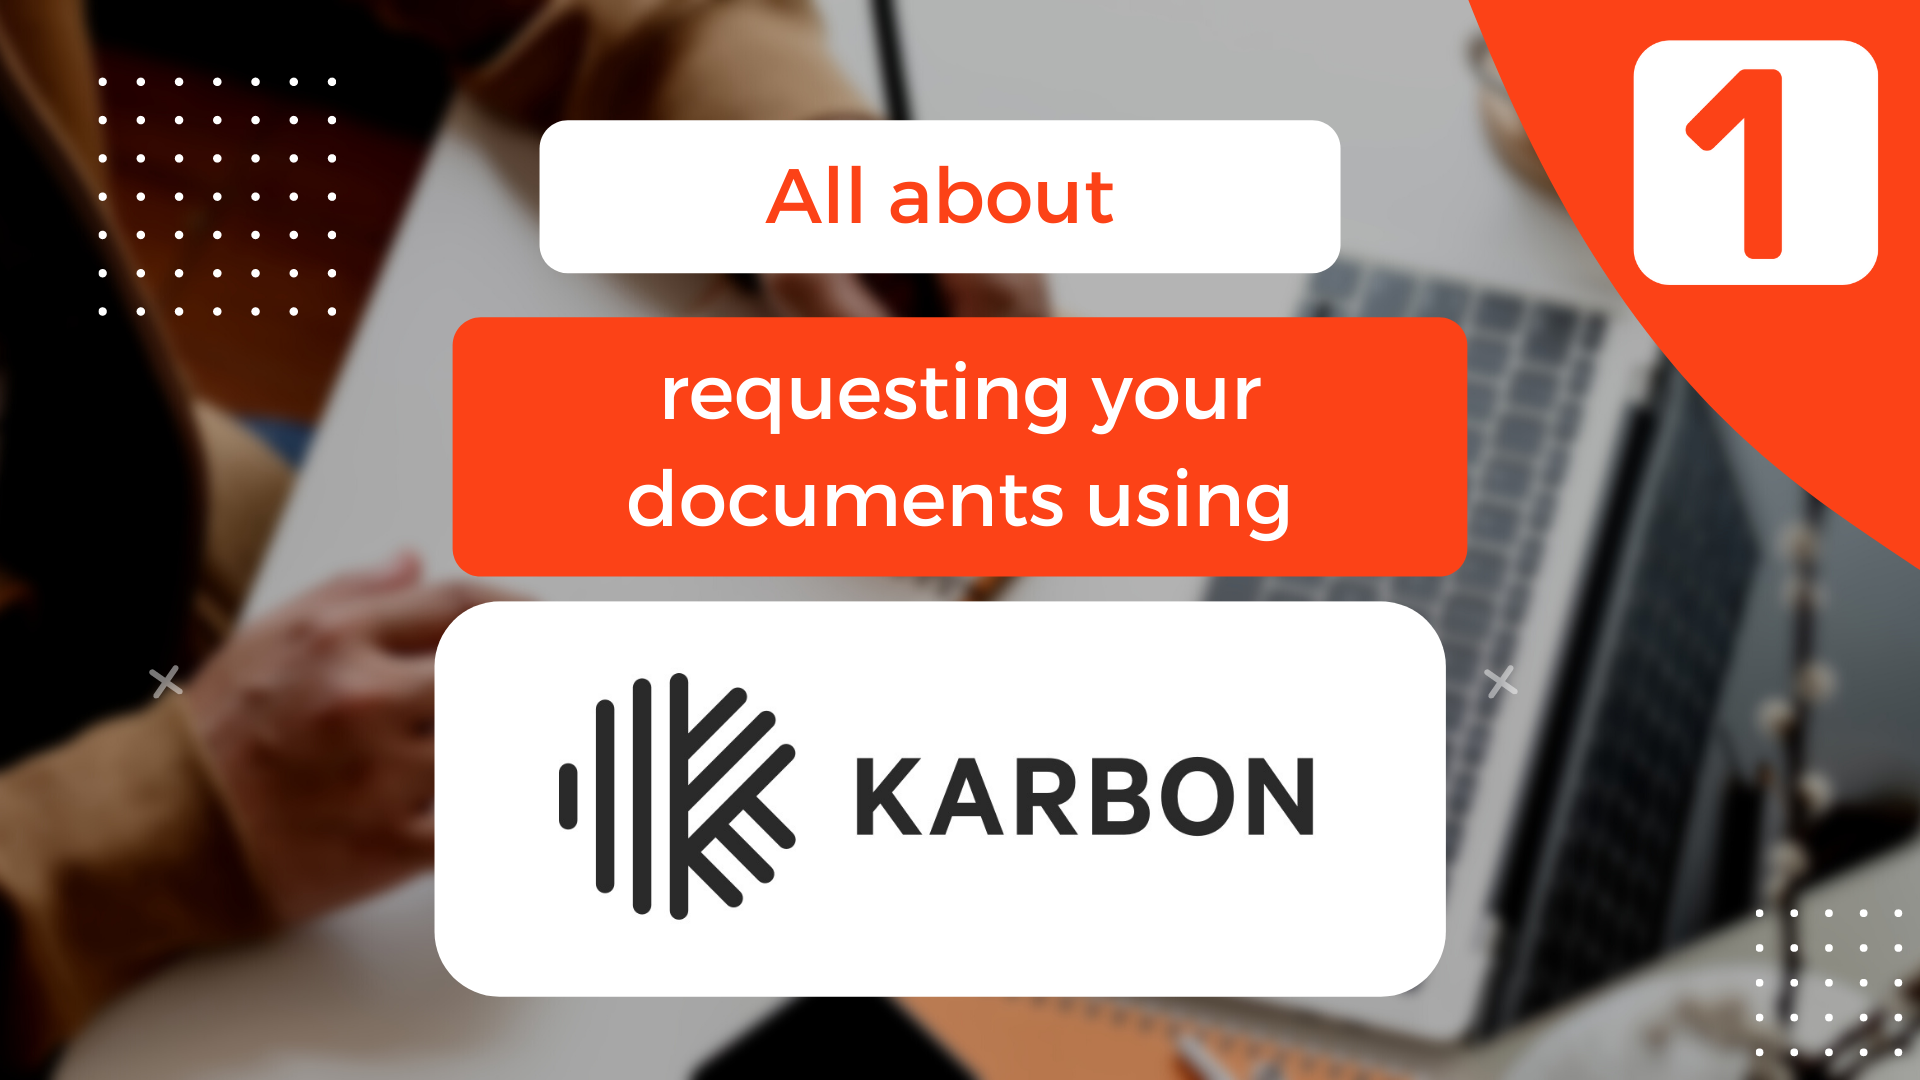 All about requesting your documents using Karbon!